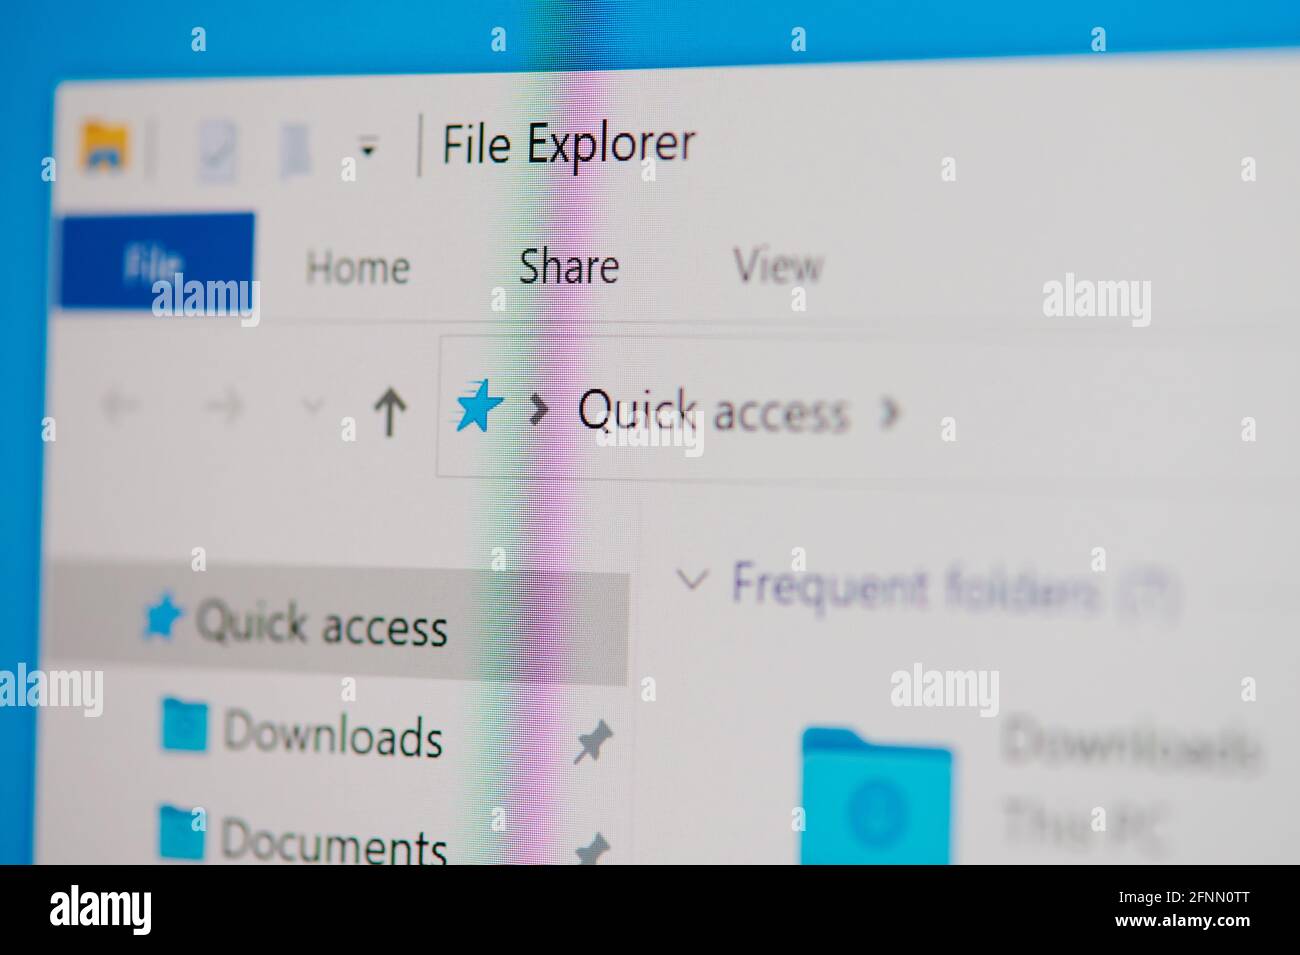 New york, USA - May 17, 2021: File explorer in windows os on  screen macro close up view Stock Photo